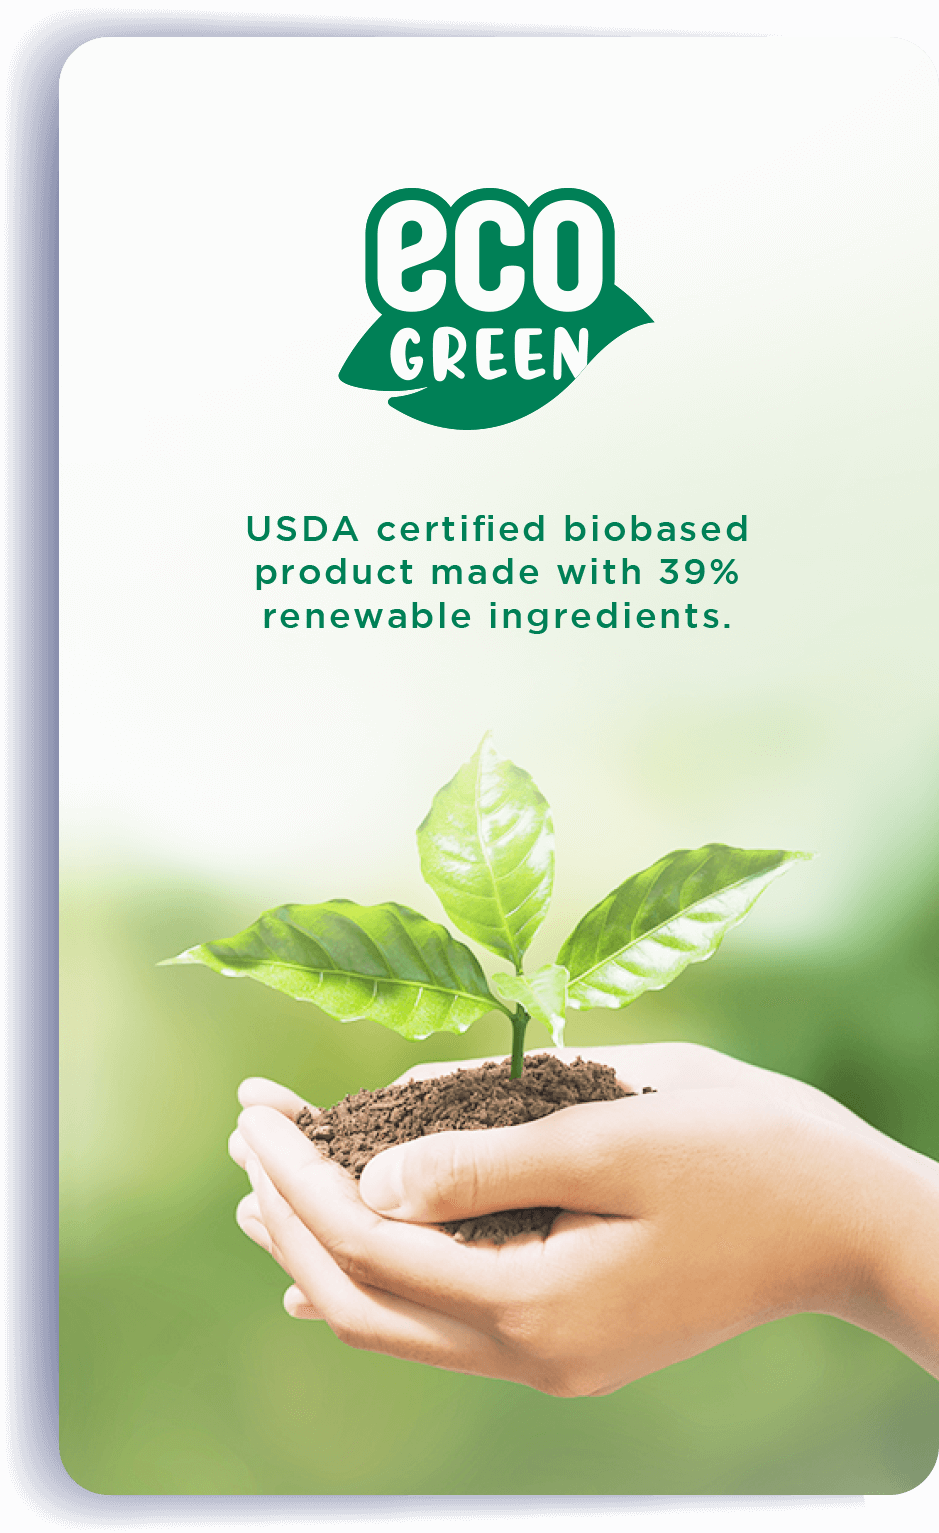 eco GREEN: USDA certified biobased product made with 39% renewable ingredients.